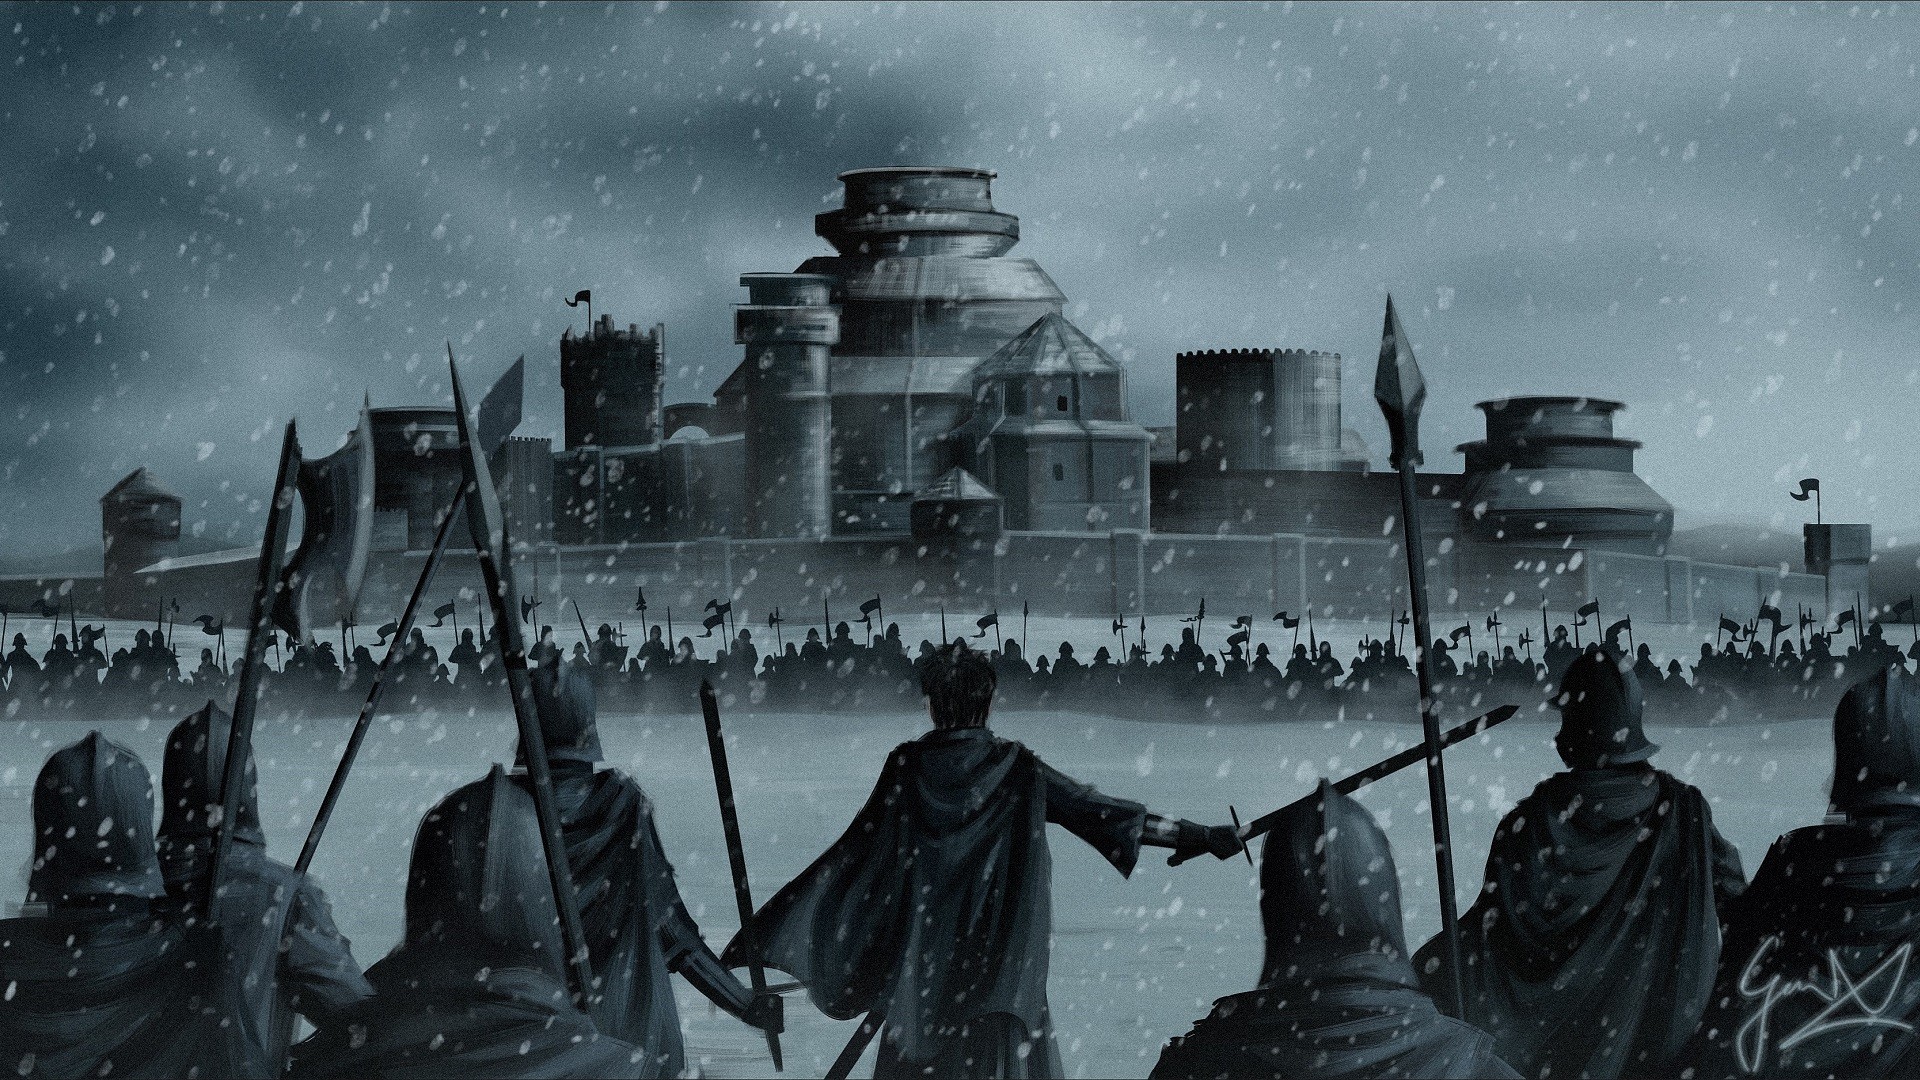 Game Of Thrones Winterfell Stannis Baratheon War Army Snow Winter Artwork A Song Of Ice And Fire Fan 1920x1080